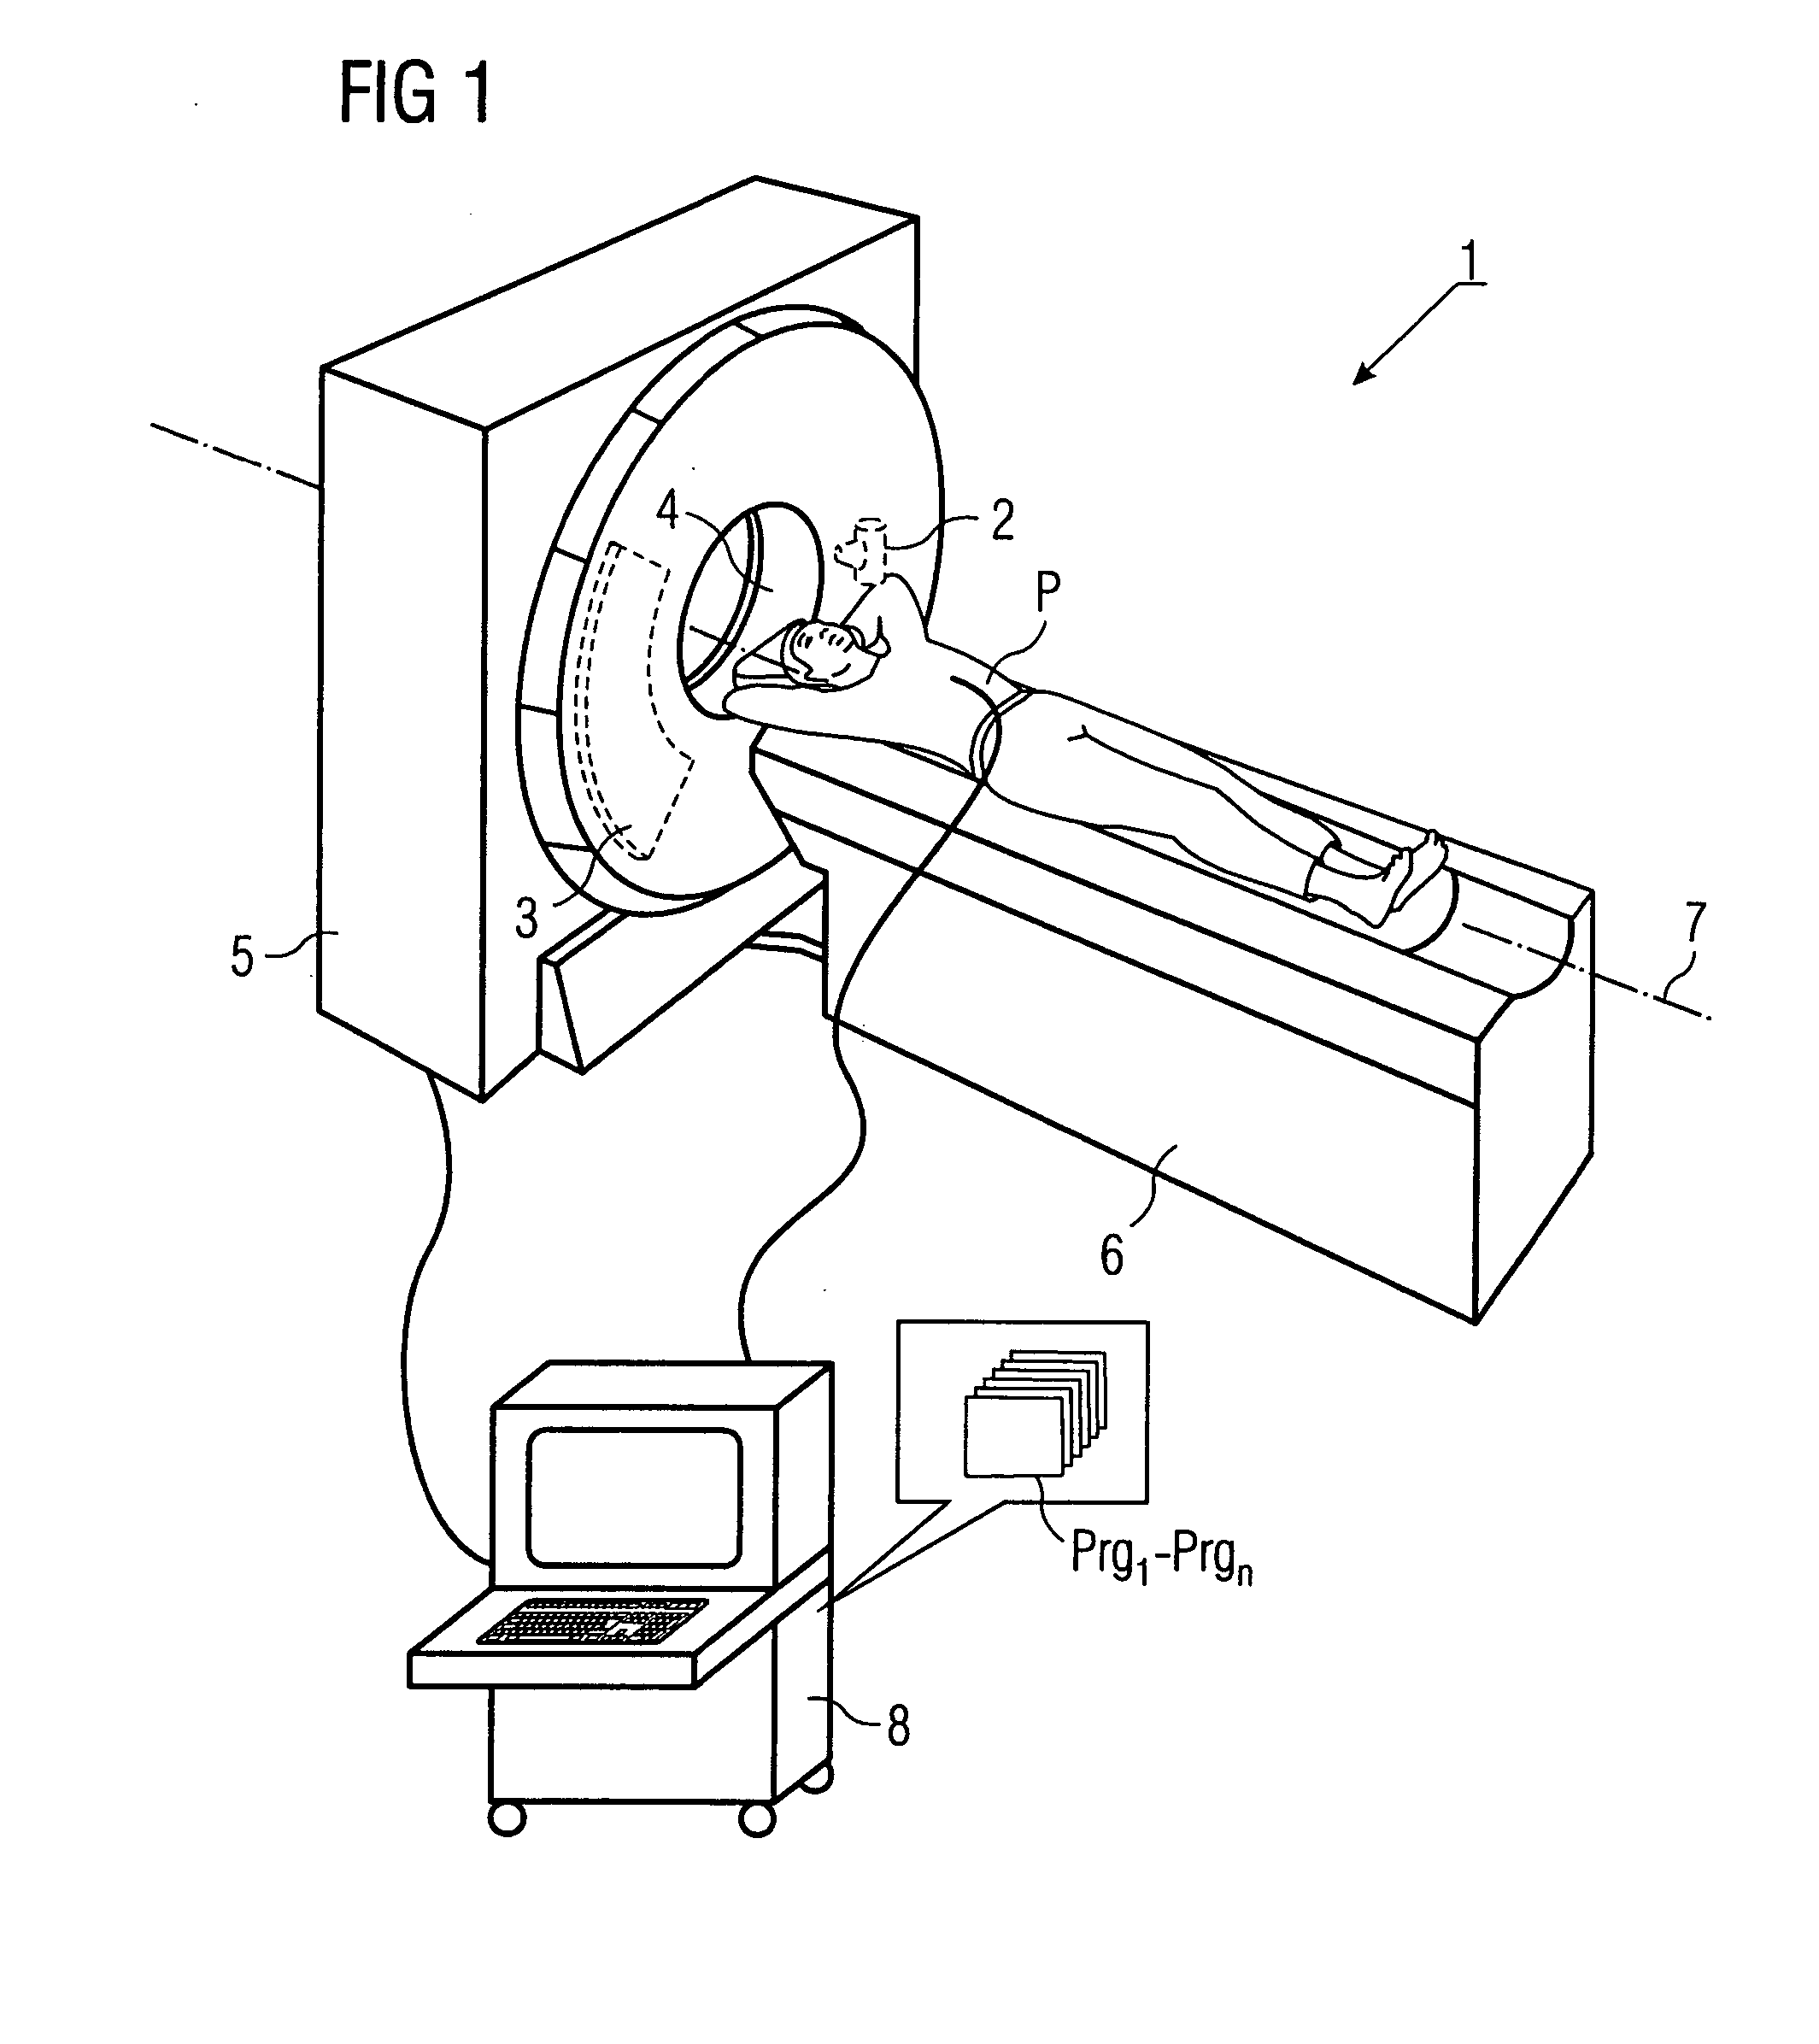 Method for producing CT images of an examination object having a periodically moving subregion